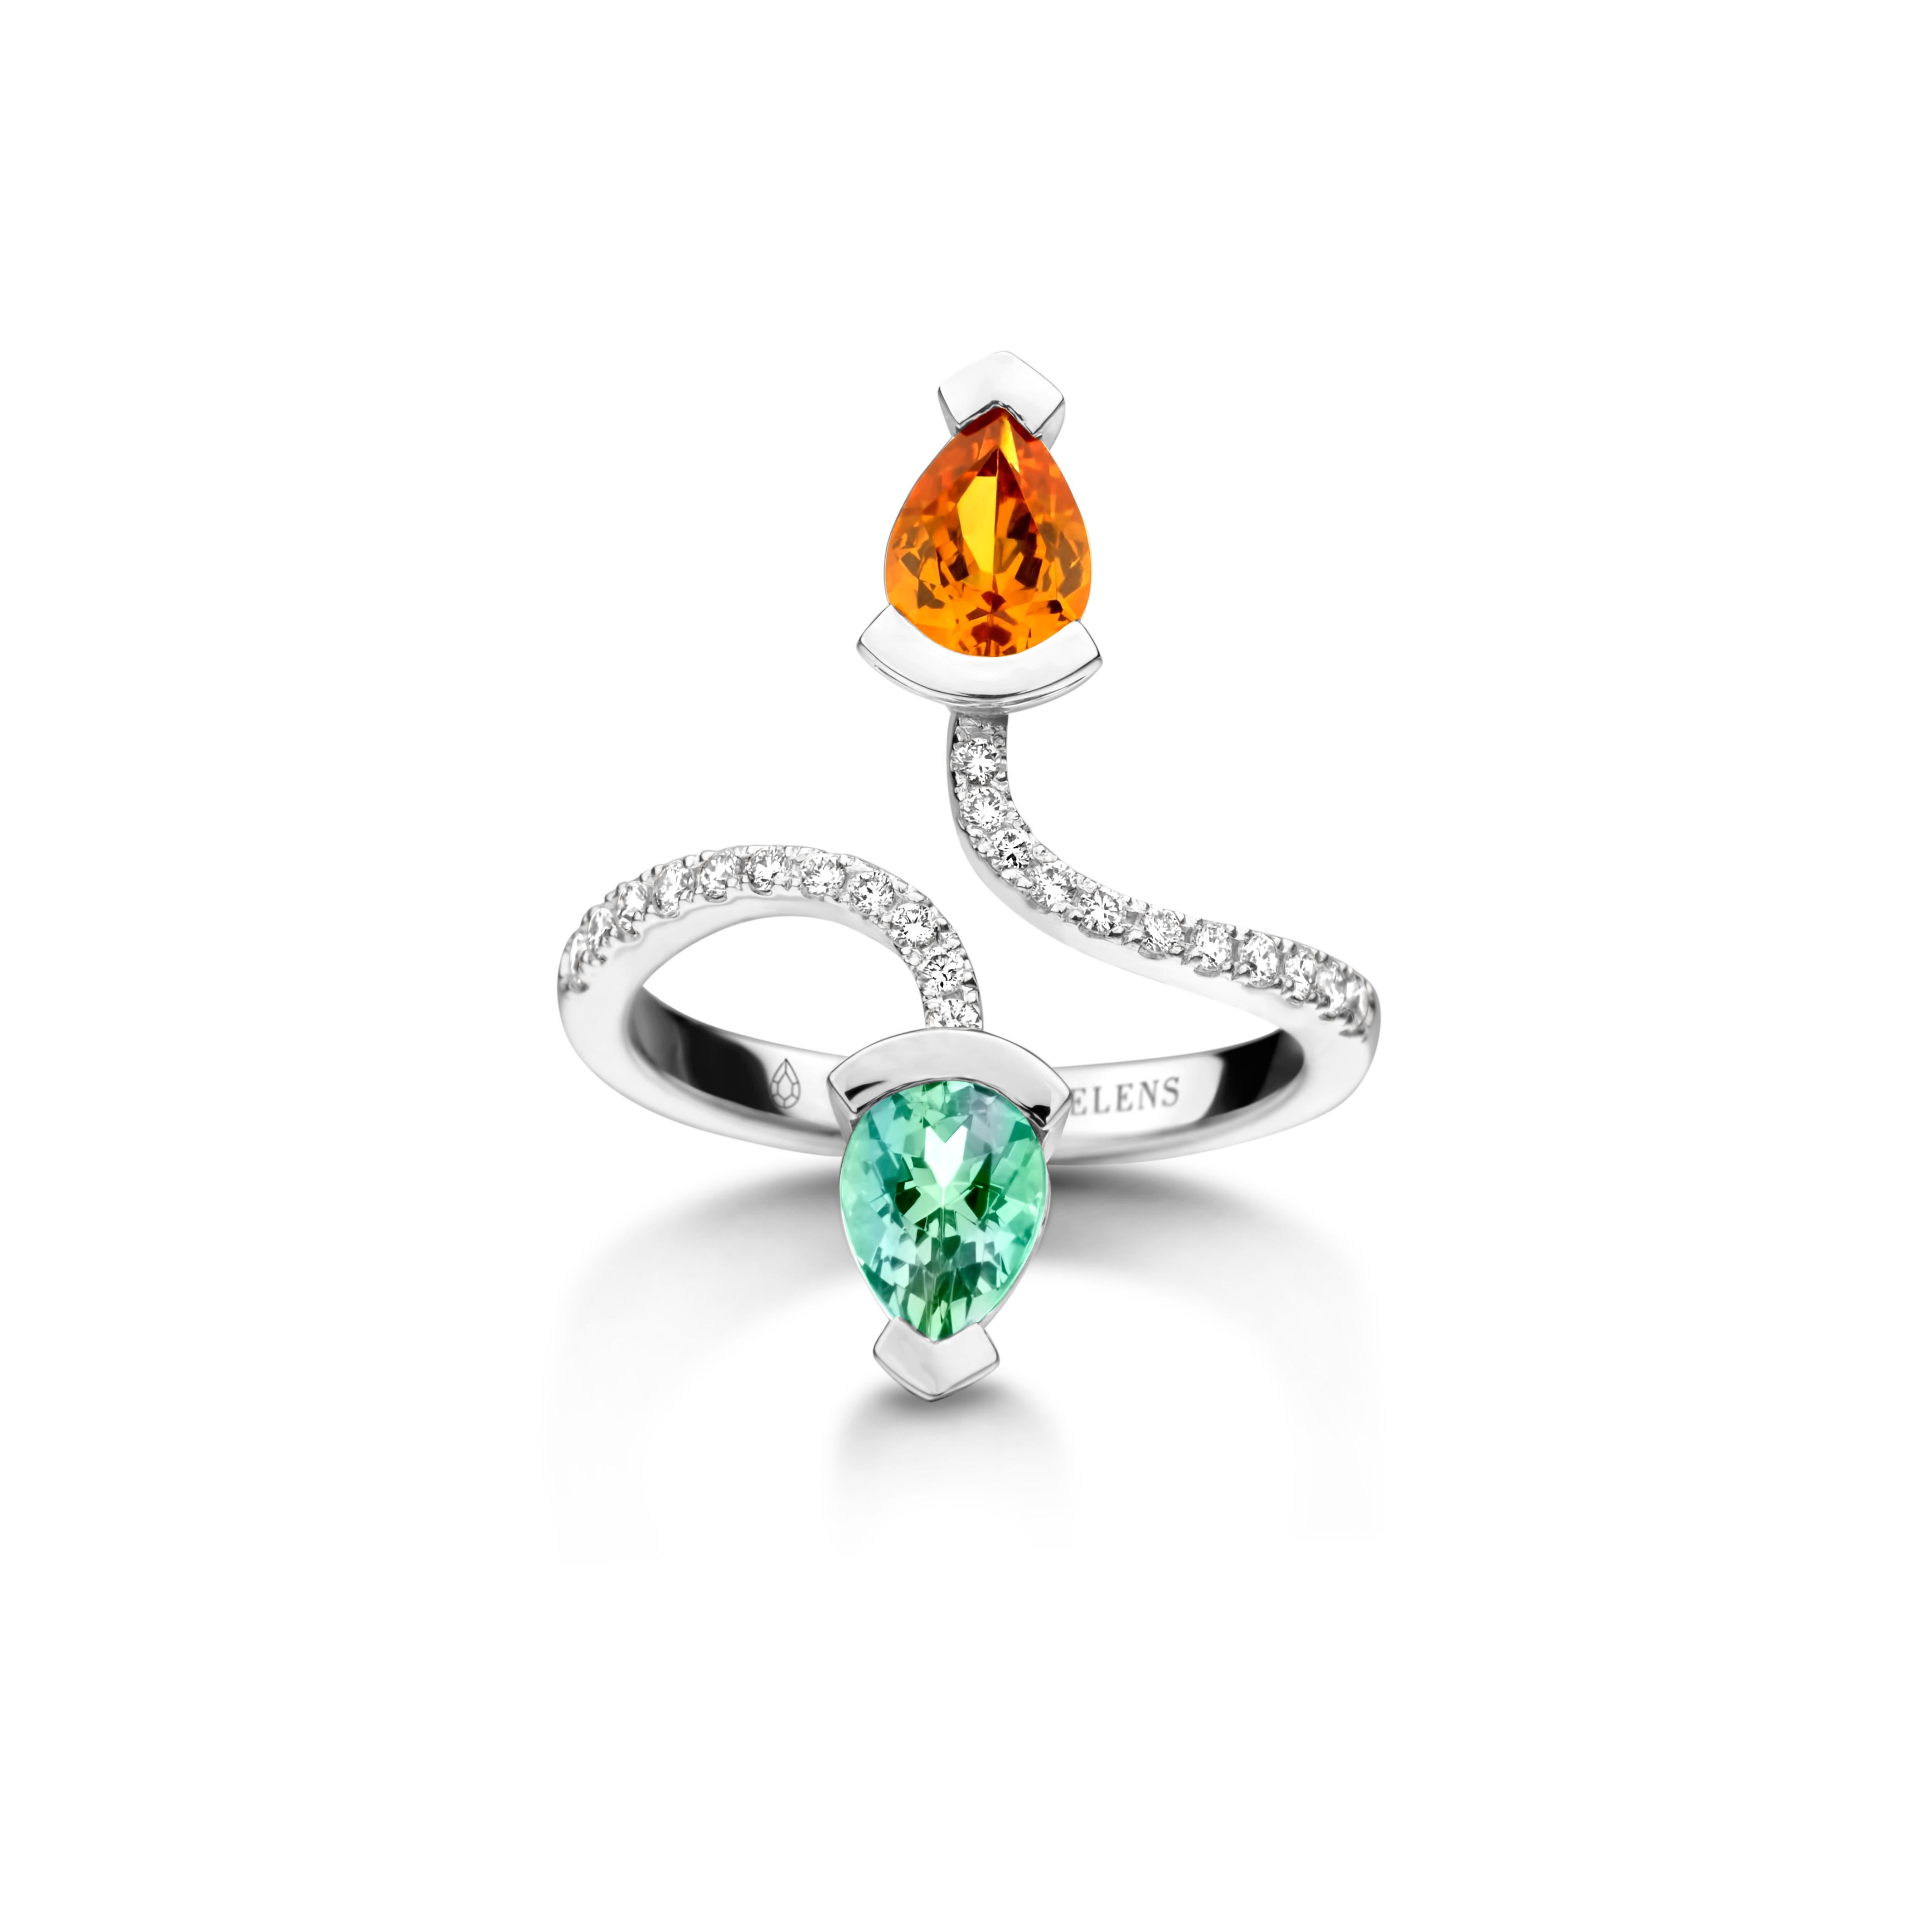 Contemporary Mandarin Garnet And Mint Tourmaline Rose Gold Diamond Cocktail Ring For Sale